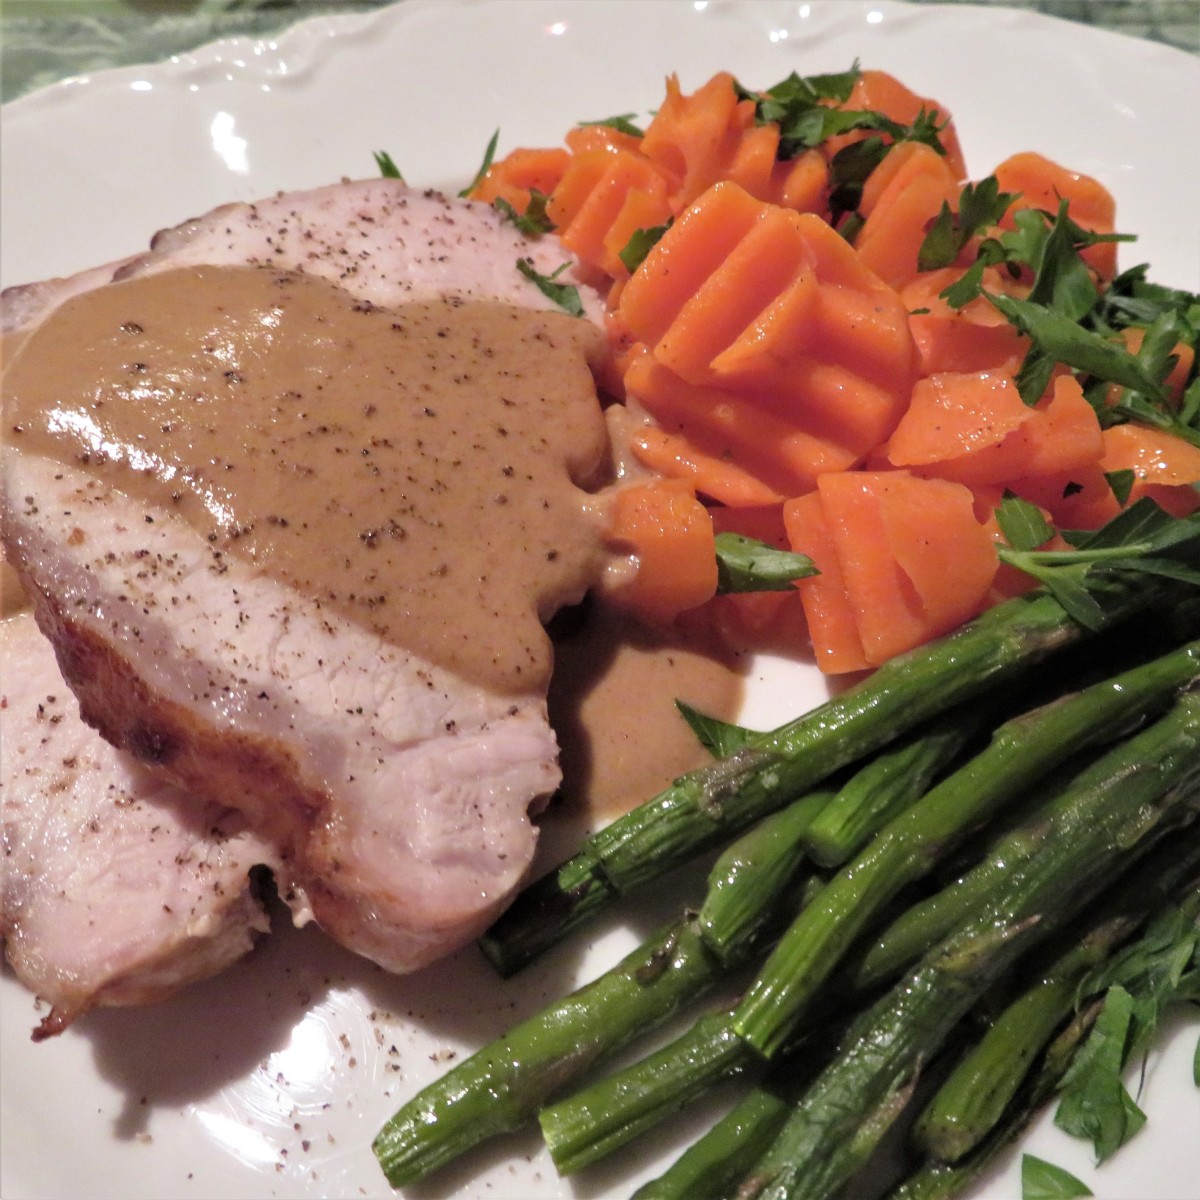 Roasted pork napped with mustard sauce, baked asparagus, and crinkle-cut carrots with chopped parsley